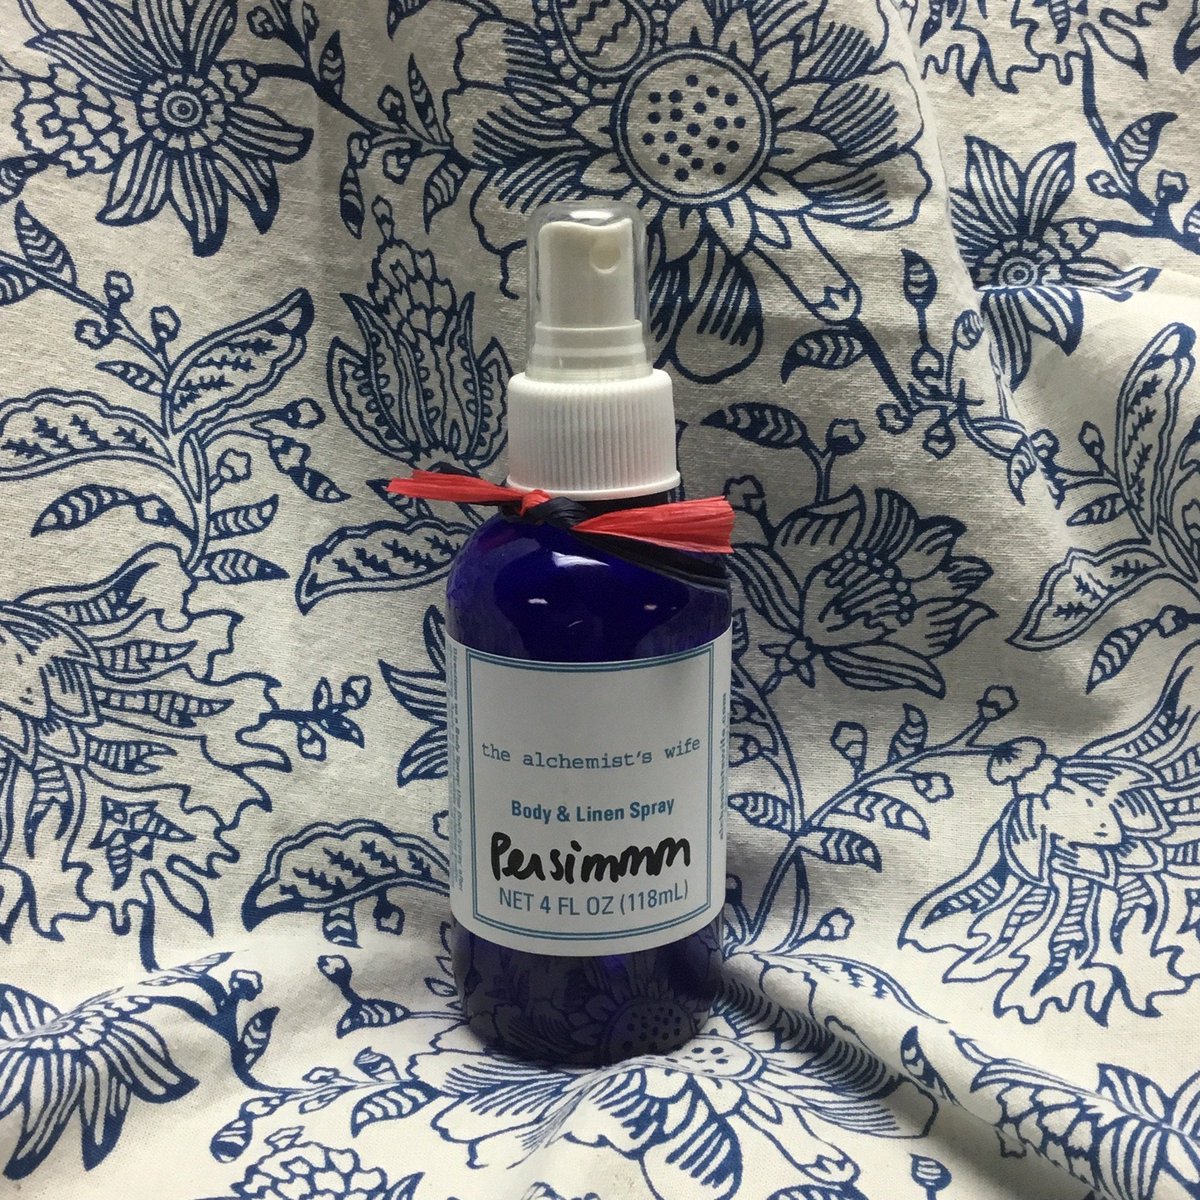 Persimmon Body & Linen Spray a clean, crisp, warm scent perfect for fall available on Etsy
etsy.me/37ttIro #bodyspray #roomspray #linenspray #airspray #airrefreshener #beddingspray #organicaloeleafjuice #witchhazel #organicwhitewillowbark